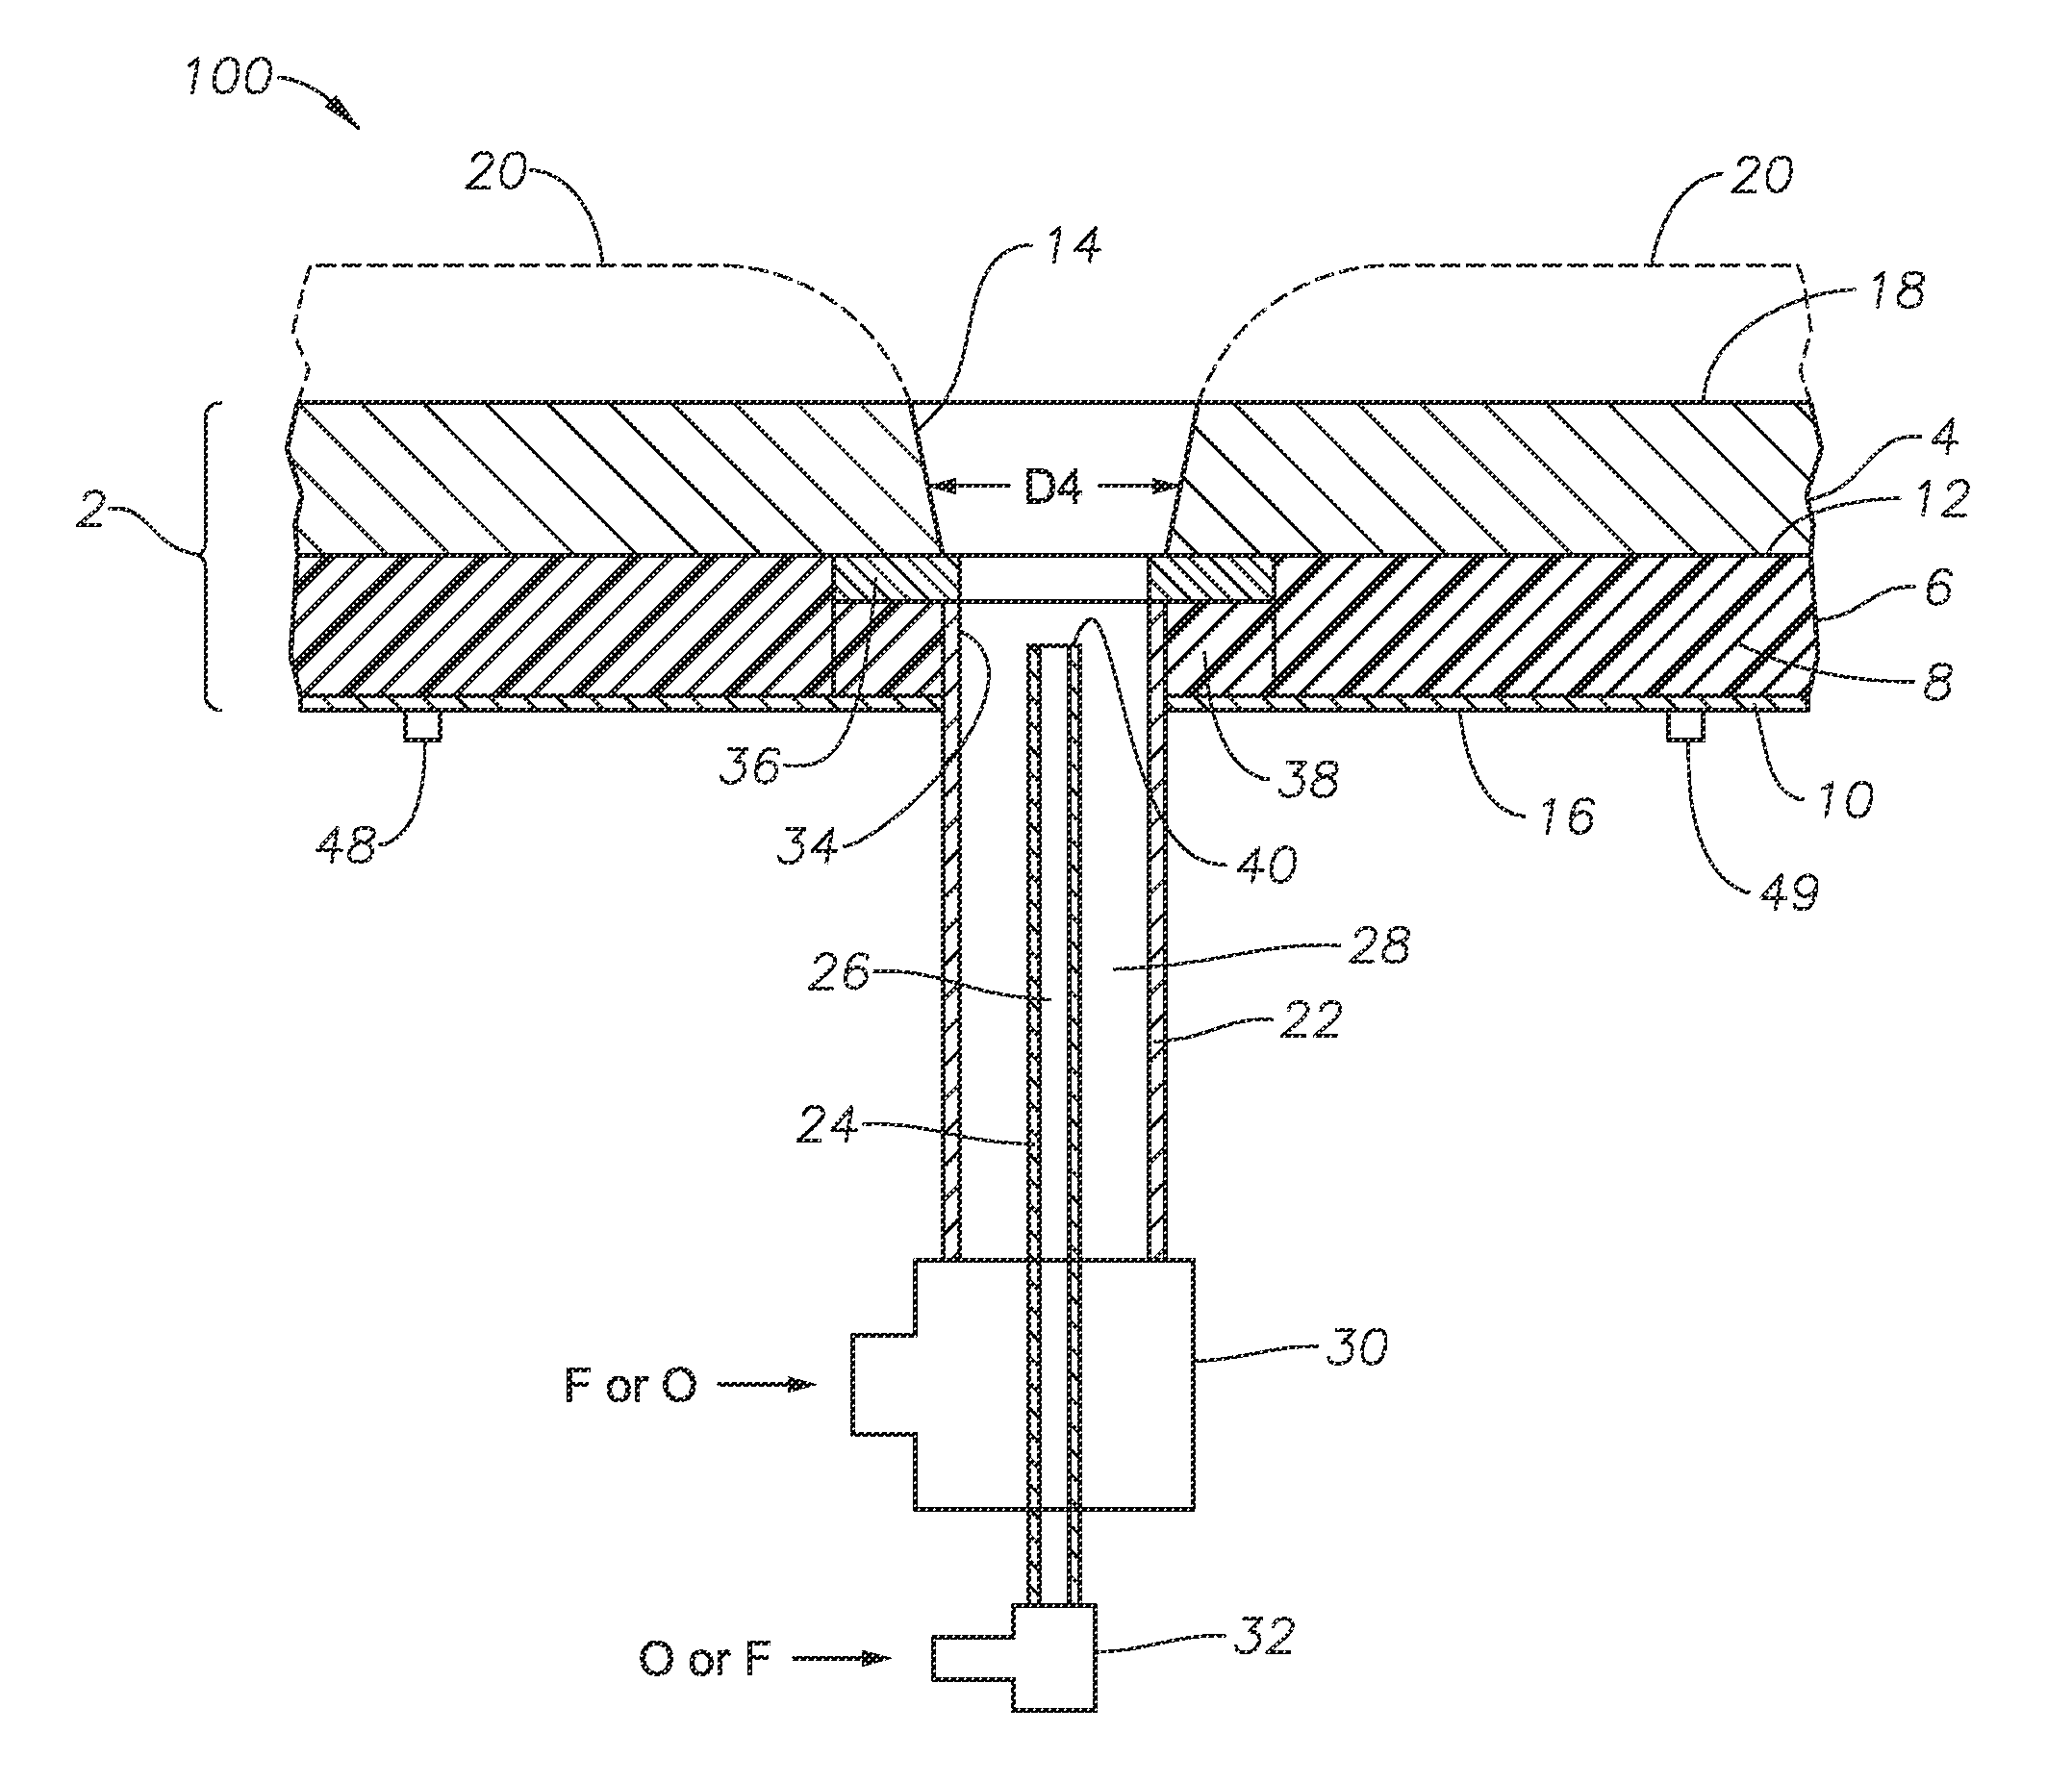 Burner panels including dry-tip burners, submerged combustion melters, and methods